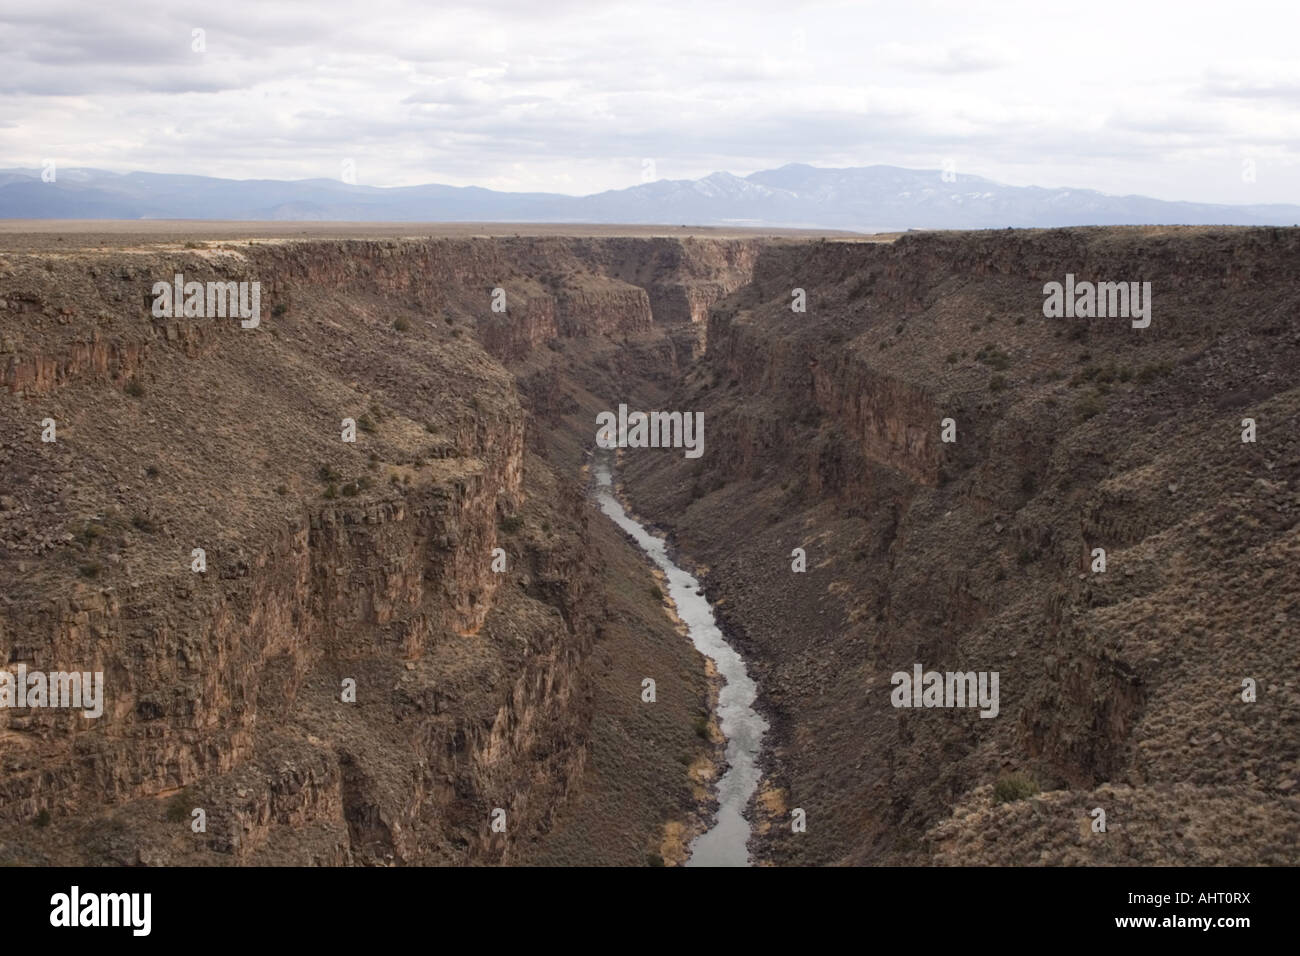 A river winding down a canyon Stock Photo